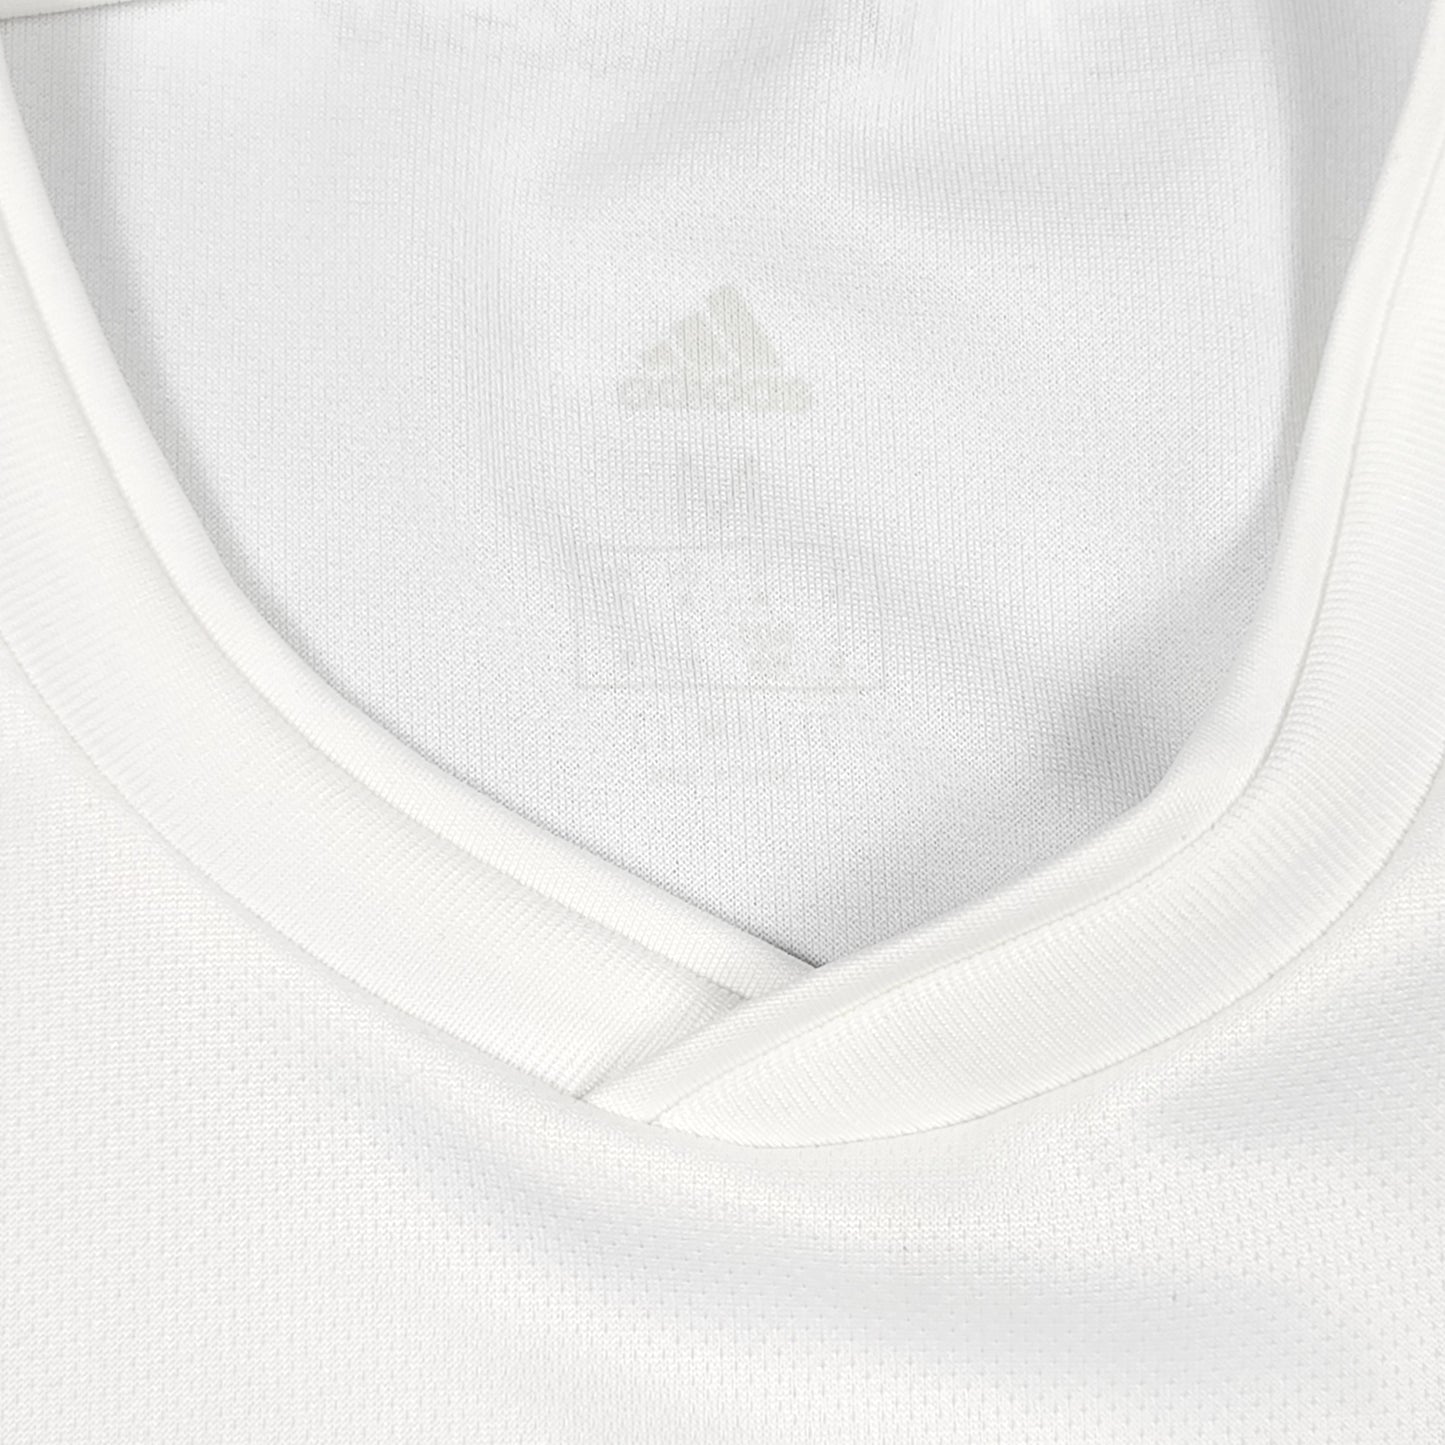 Germany adidas 2018 White Home Soccer Jersey